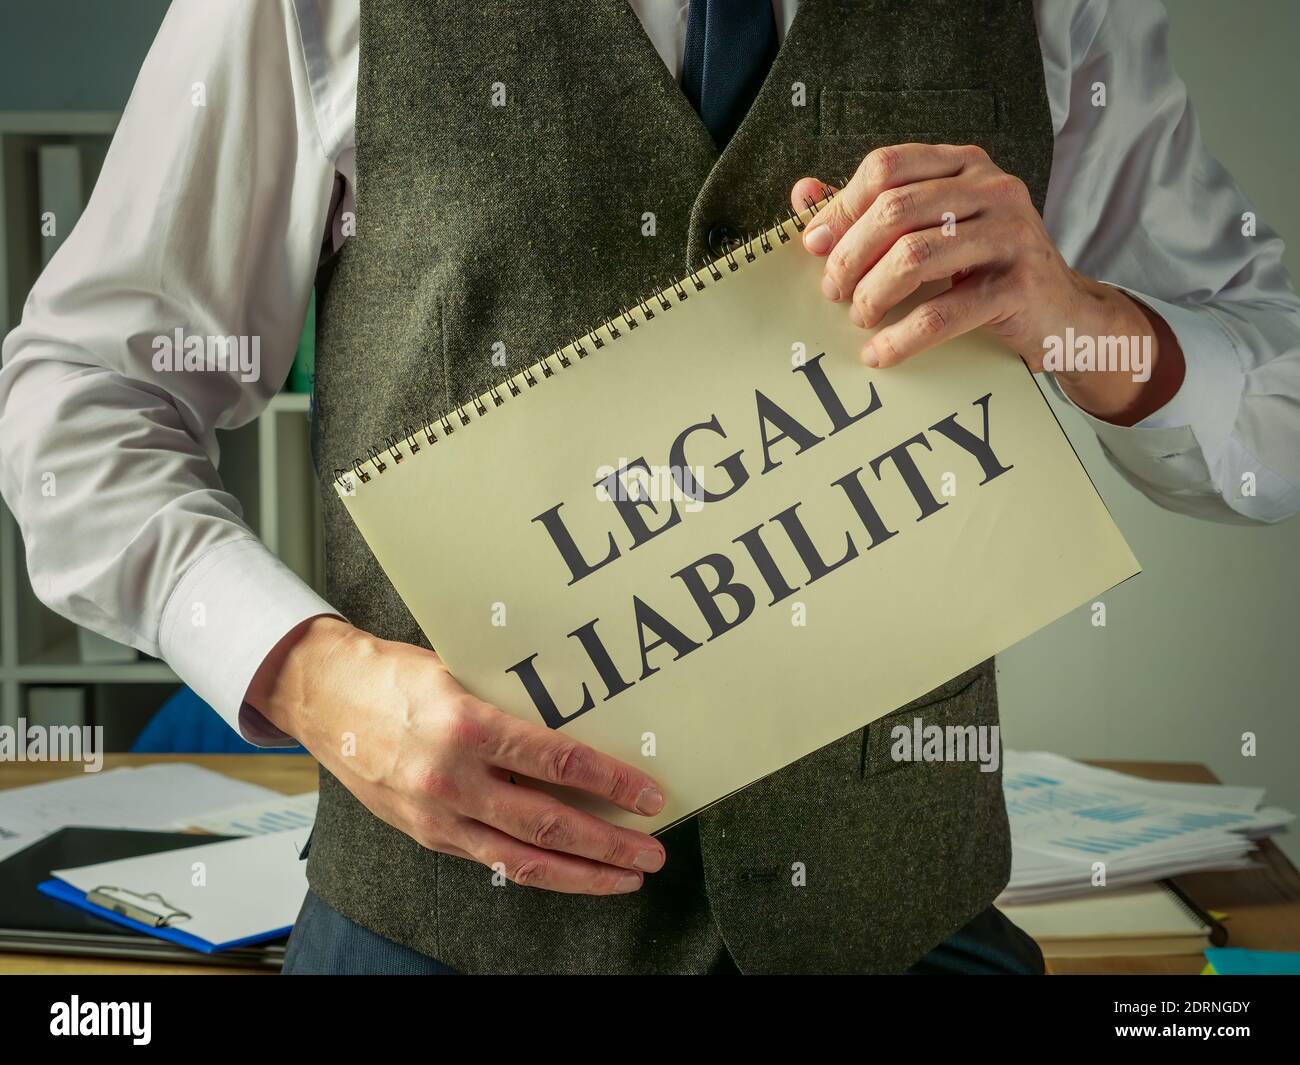 The clerk holds a book about legal liability. Stock Photo